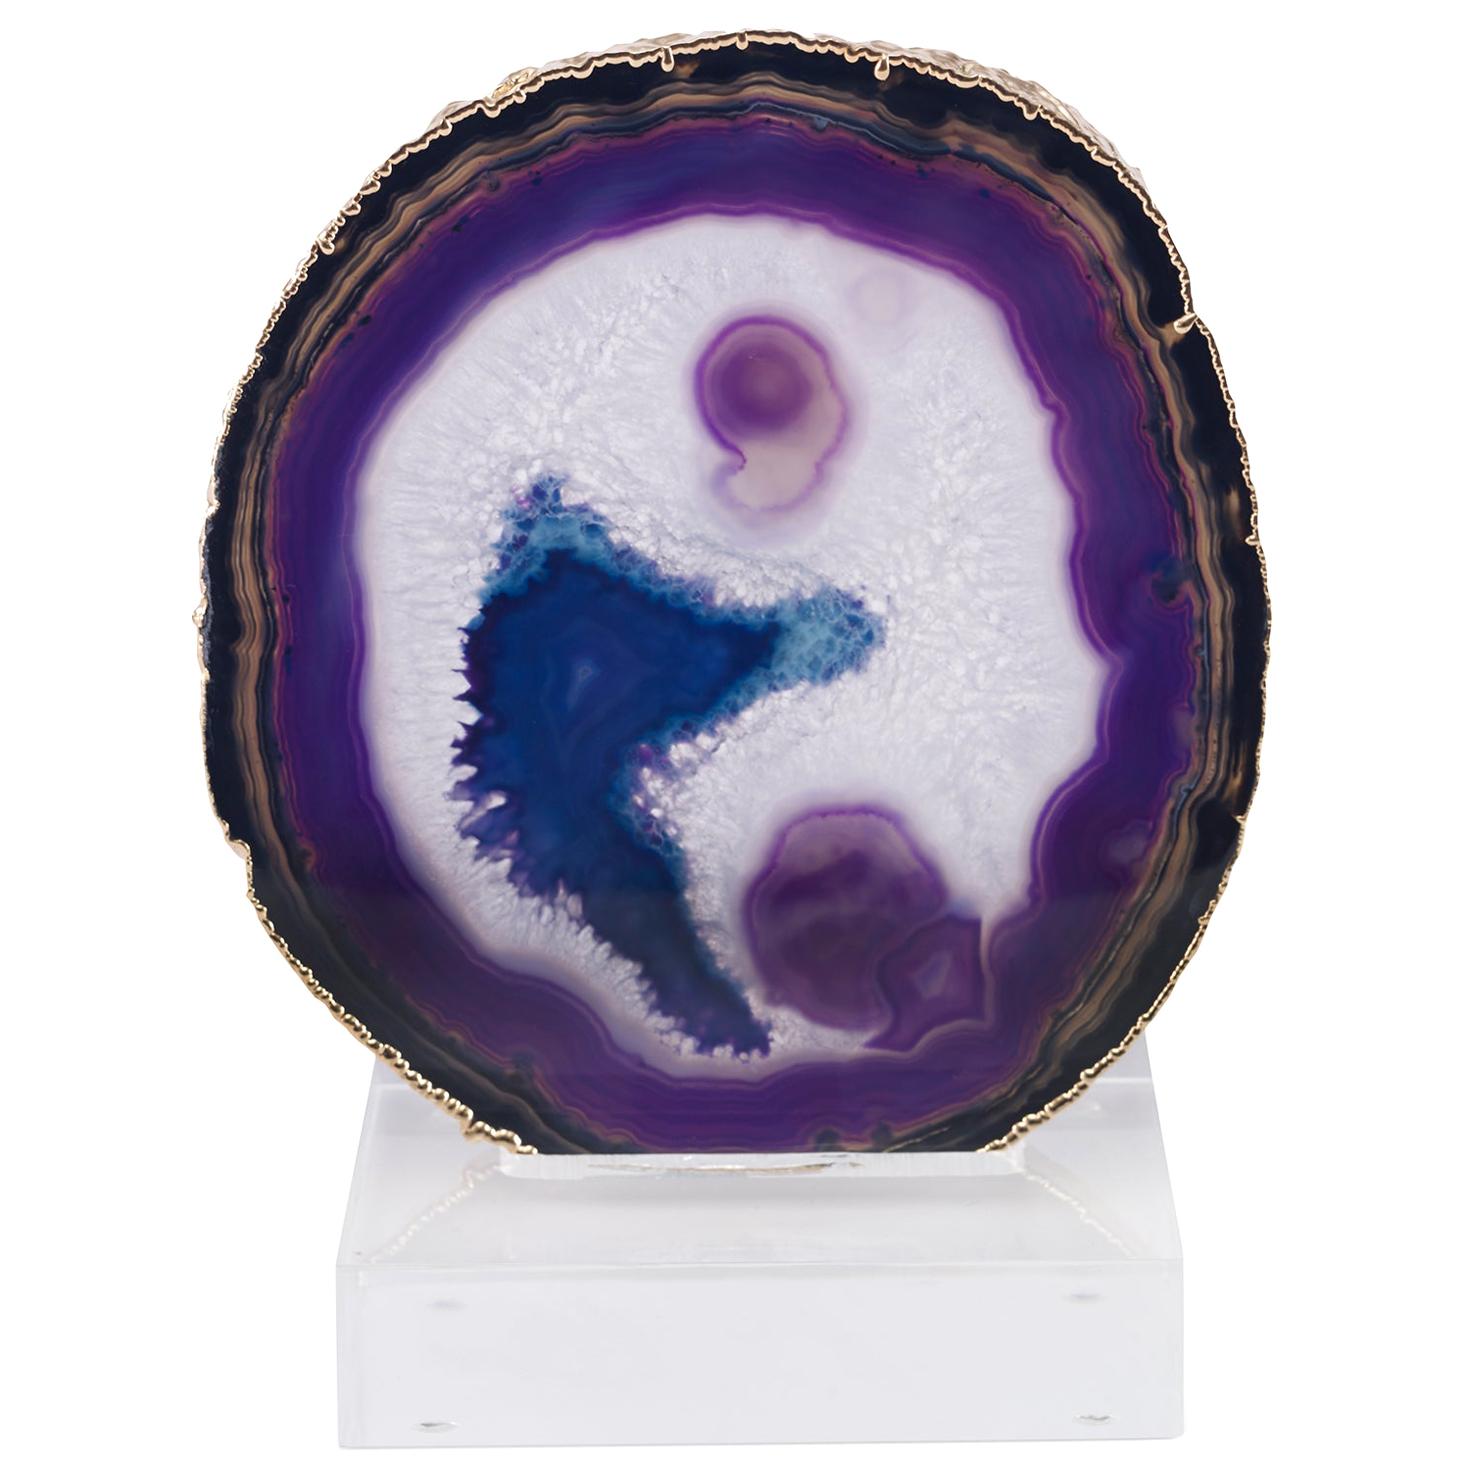 Jau Sculpture in Purple and Gold Stone by CuratedKravet